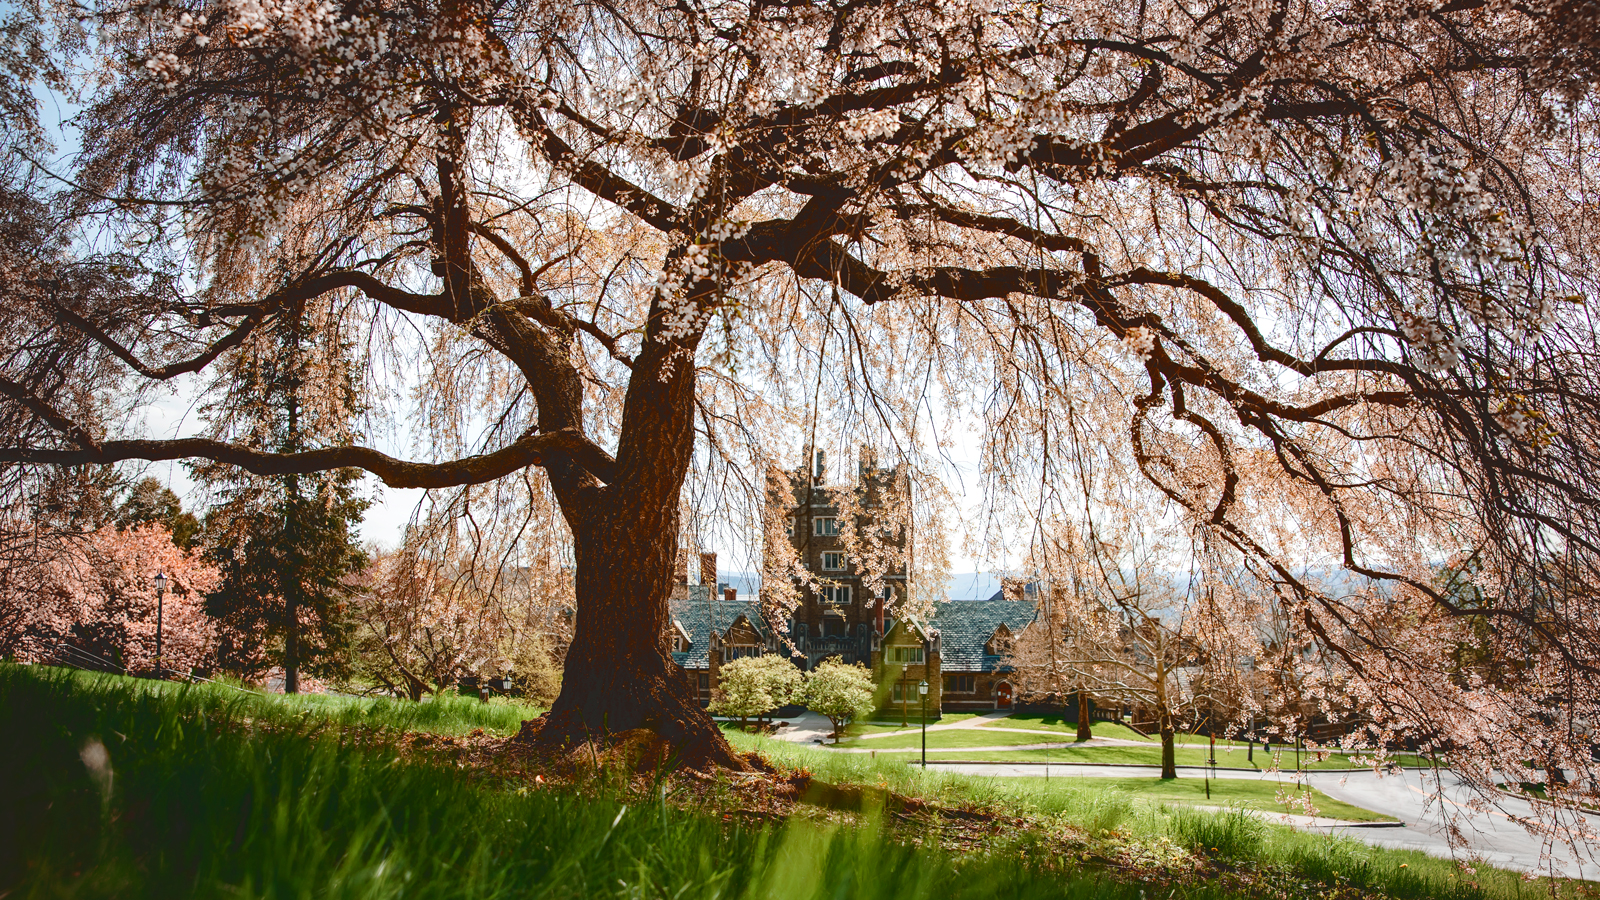 West Campus is framed by cherry blossoms.